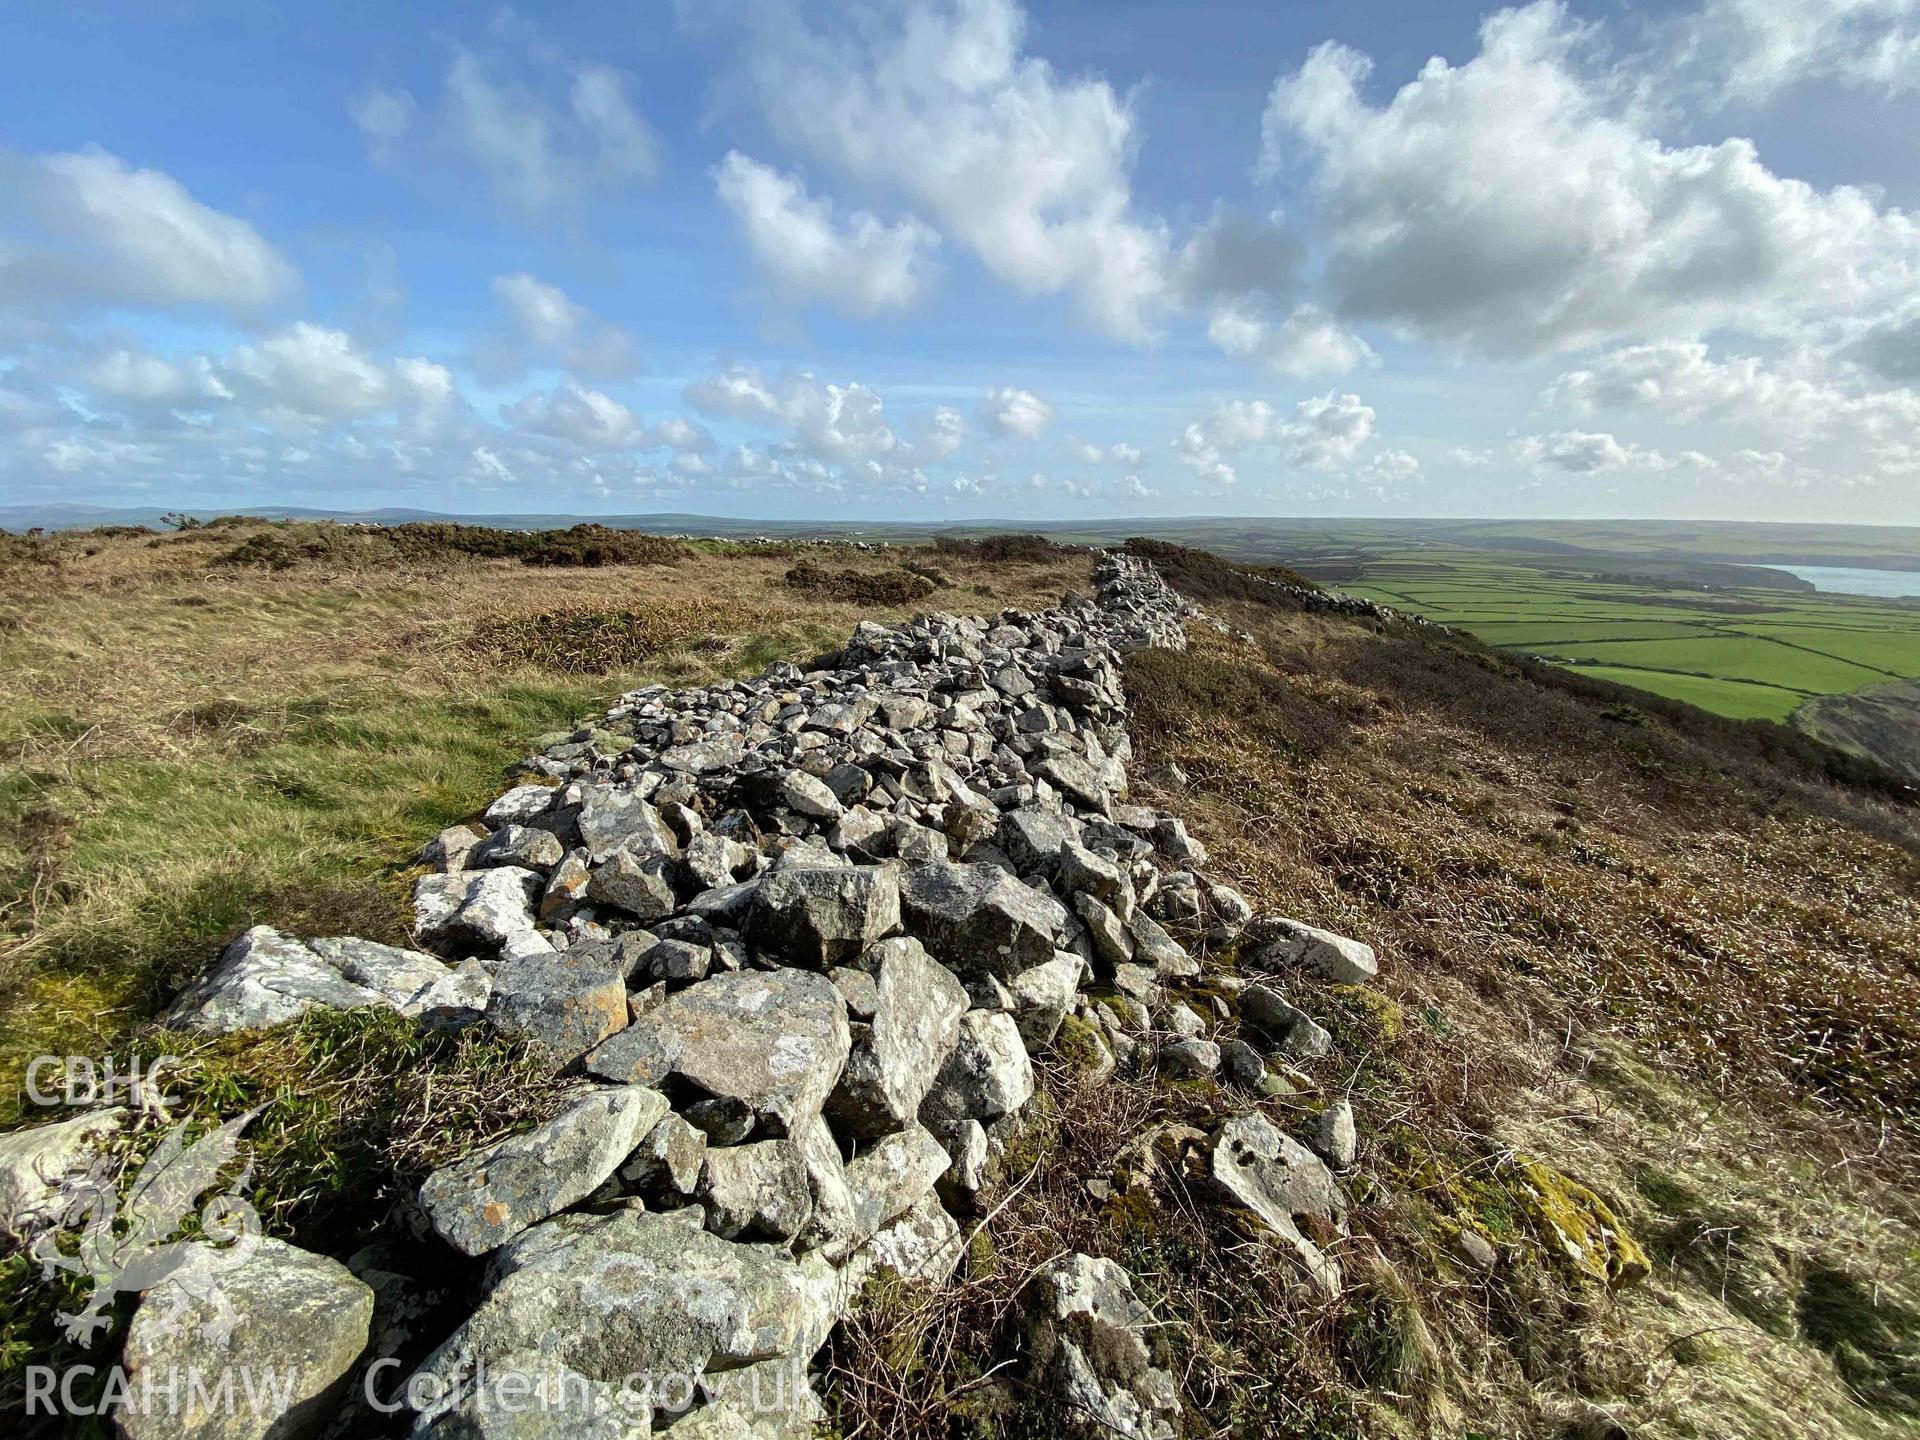 Digital photograph showing detailed view of stony bank at Garn Fawr camp, produced by Paul Davis in 2020